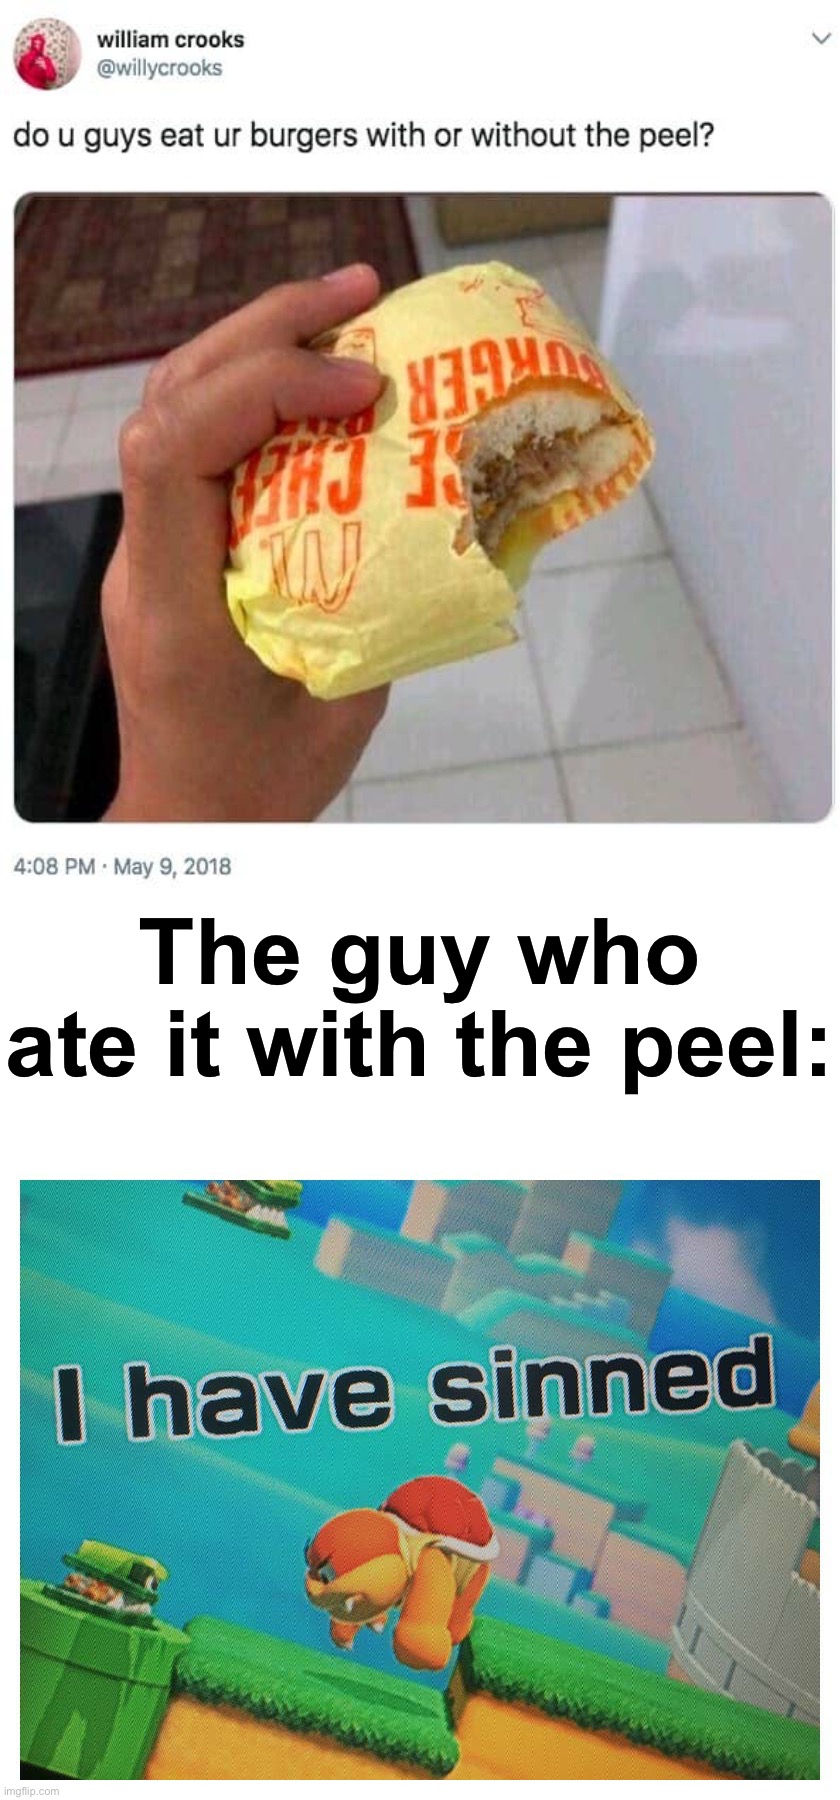 I'm glad I don't eat it with the peel | The guy who ate it with the peel: | image tagged in sin,memes,funny,funny memes,cursed image,wtf | made w/ Imgflip meme maker